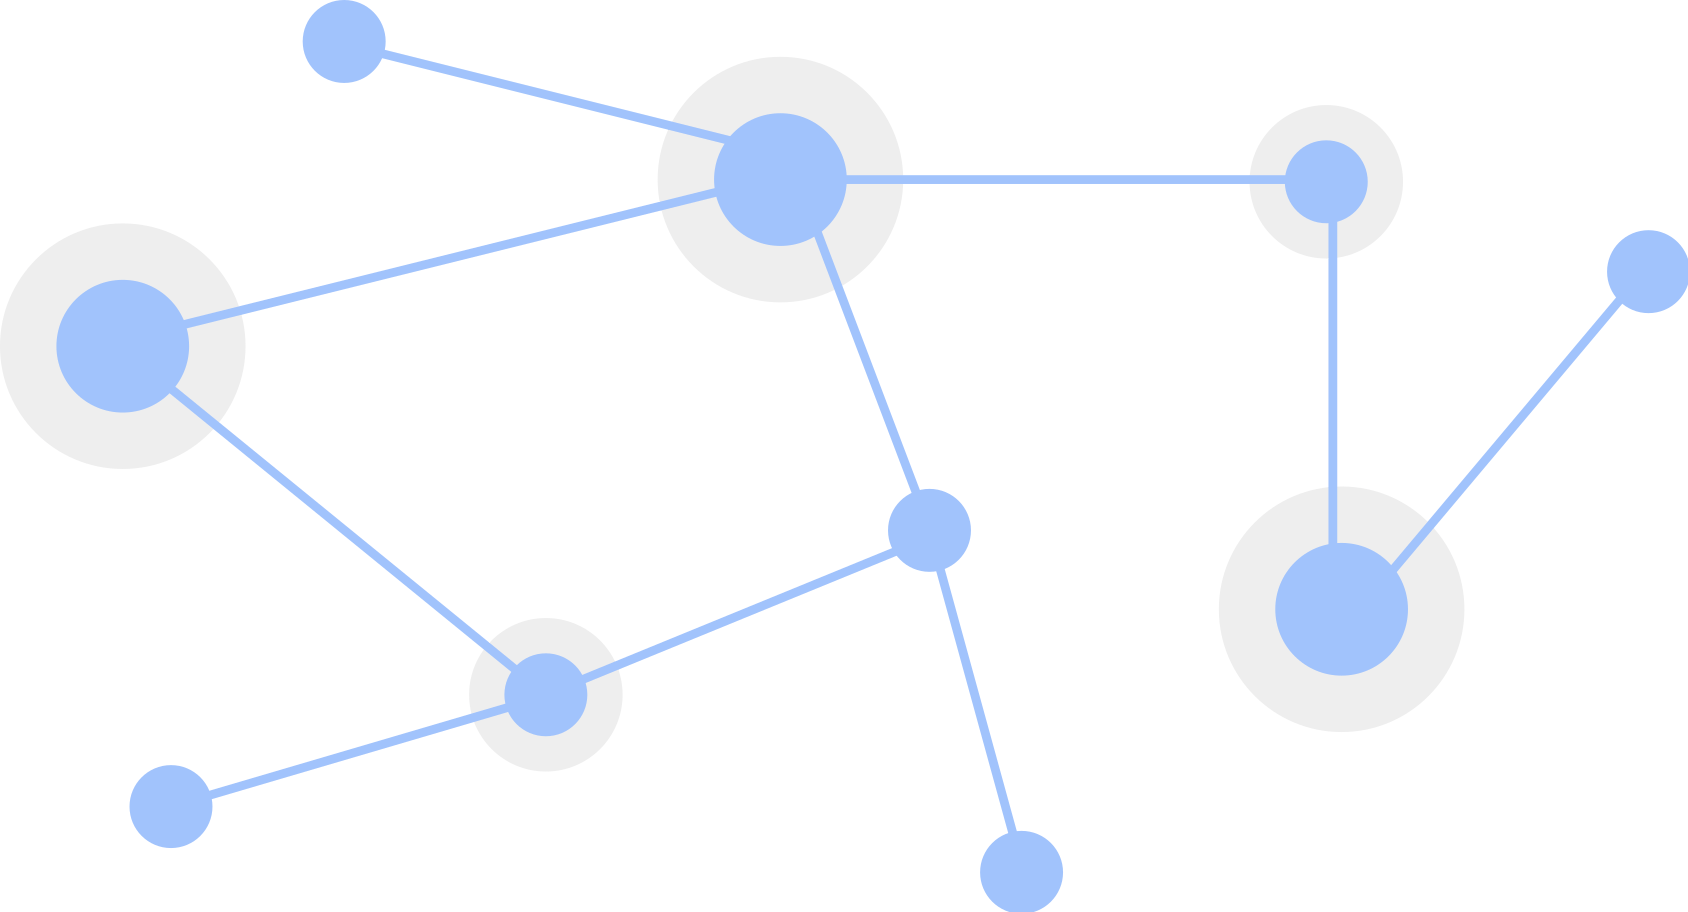 Network Topology Mapping - plotting endpoints on the network